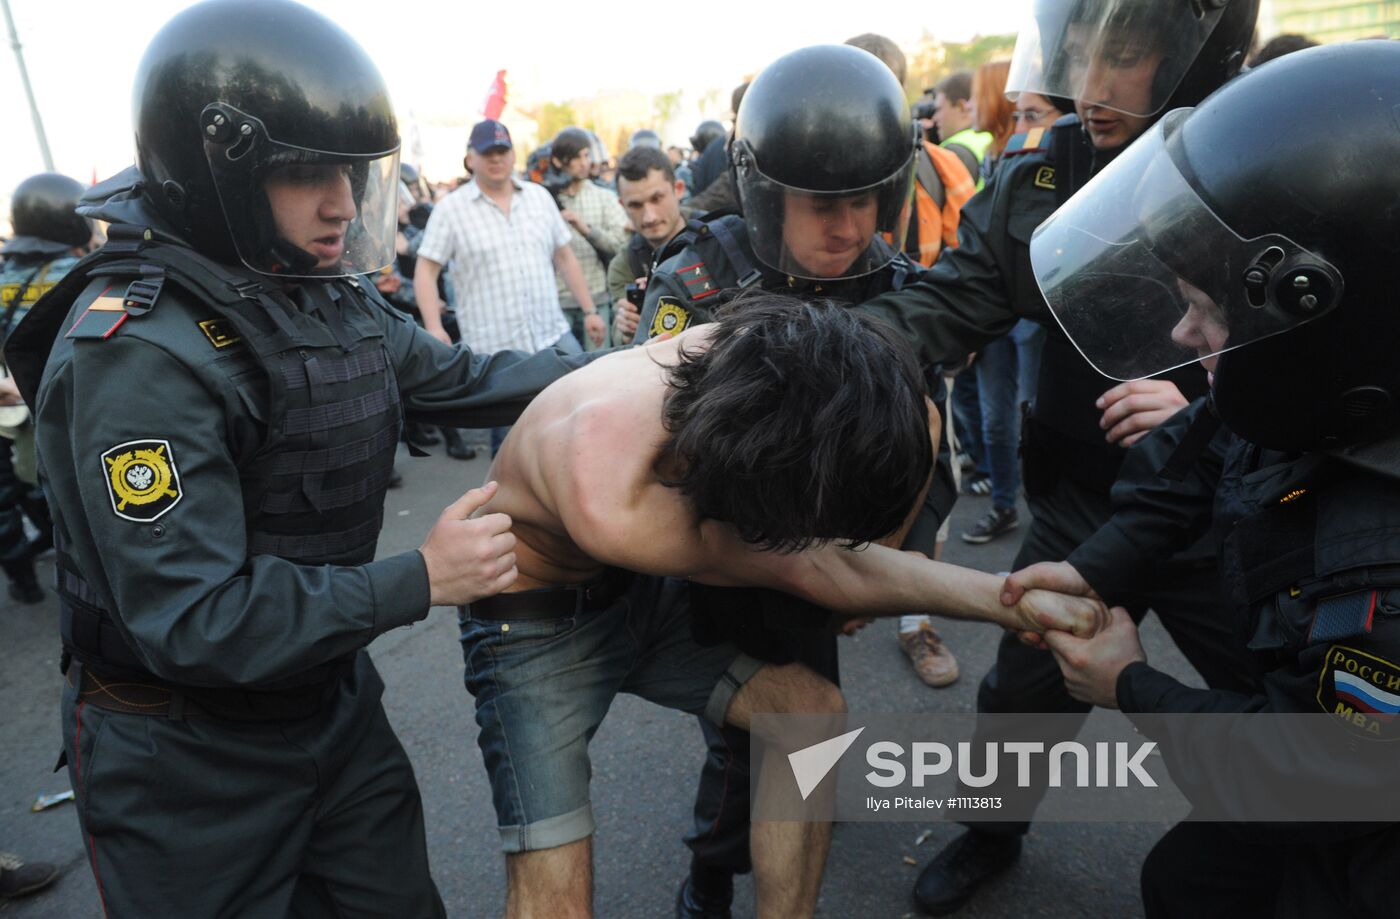 Police detain March of Millions rally participants in Moscow